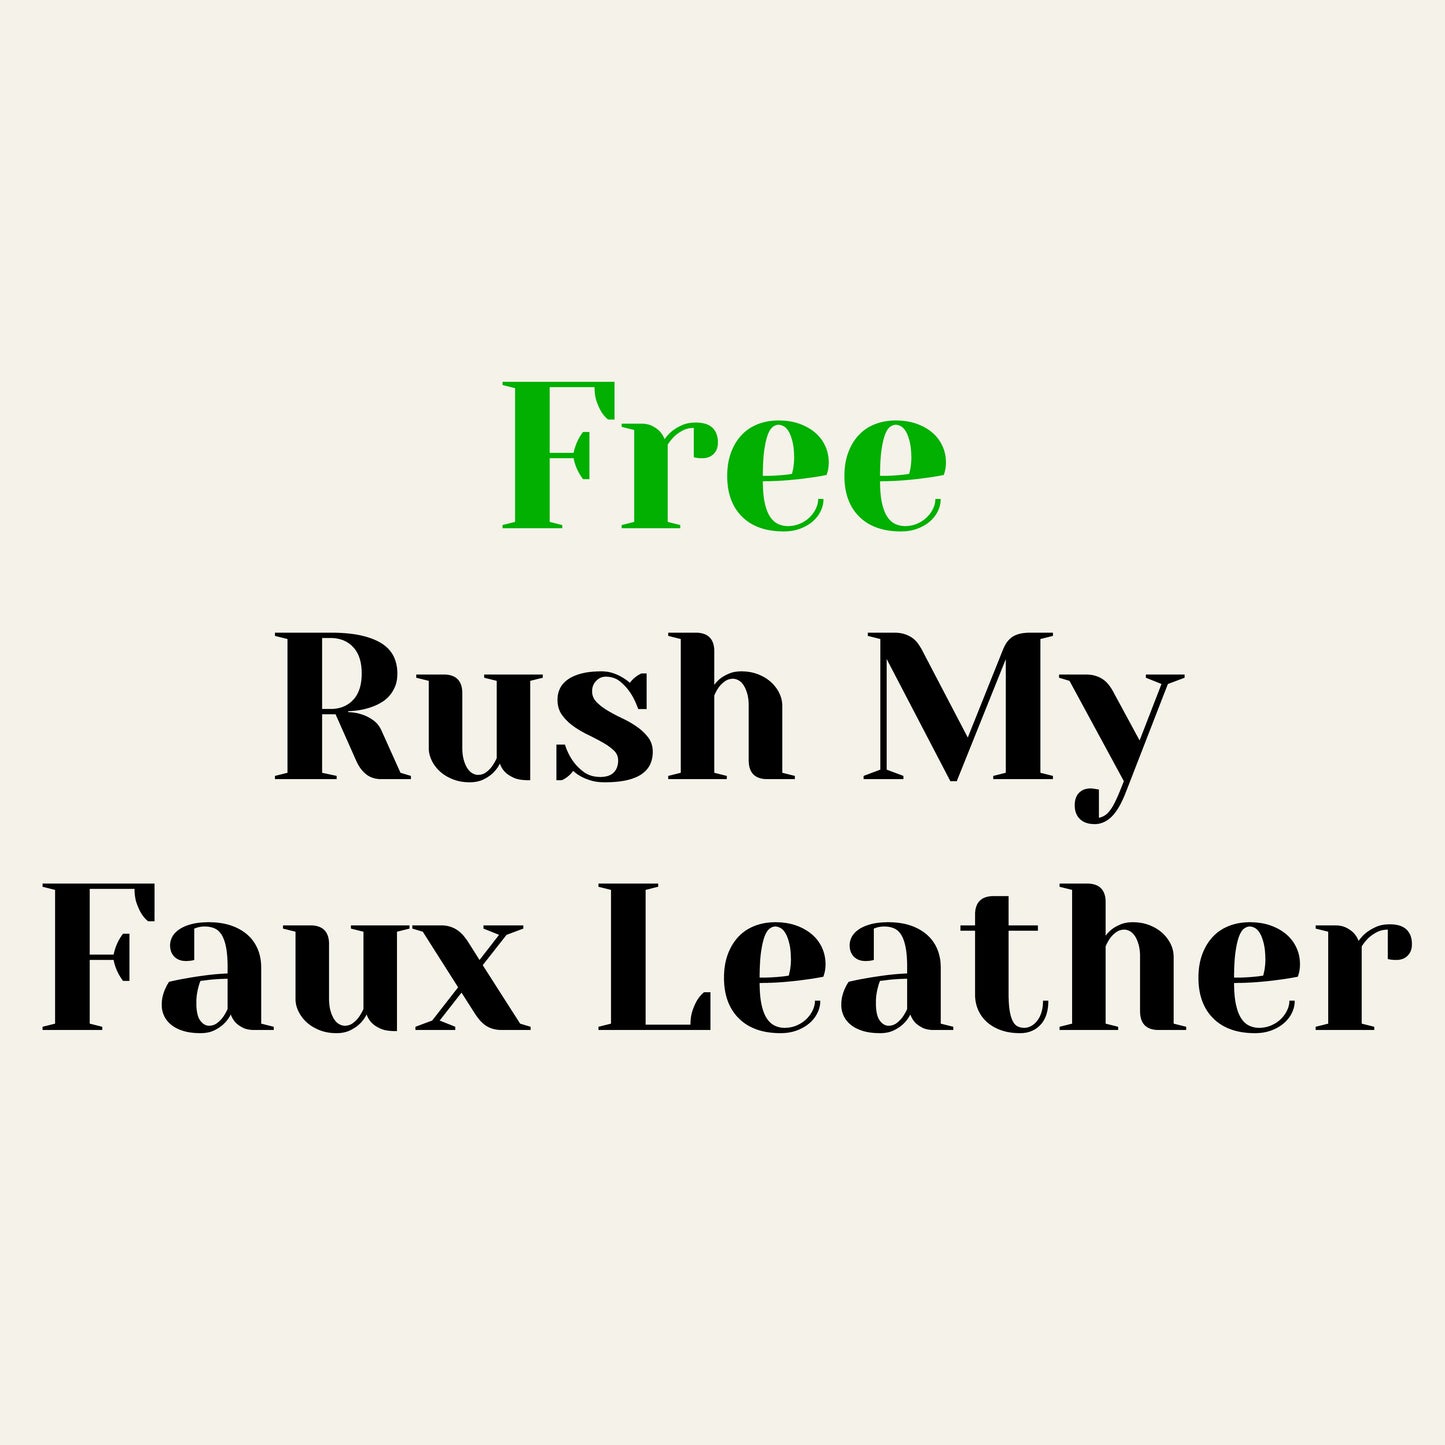 FREE Rush My Faux Leather